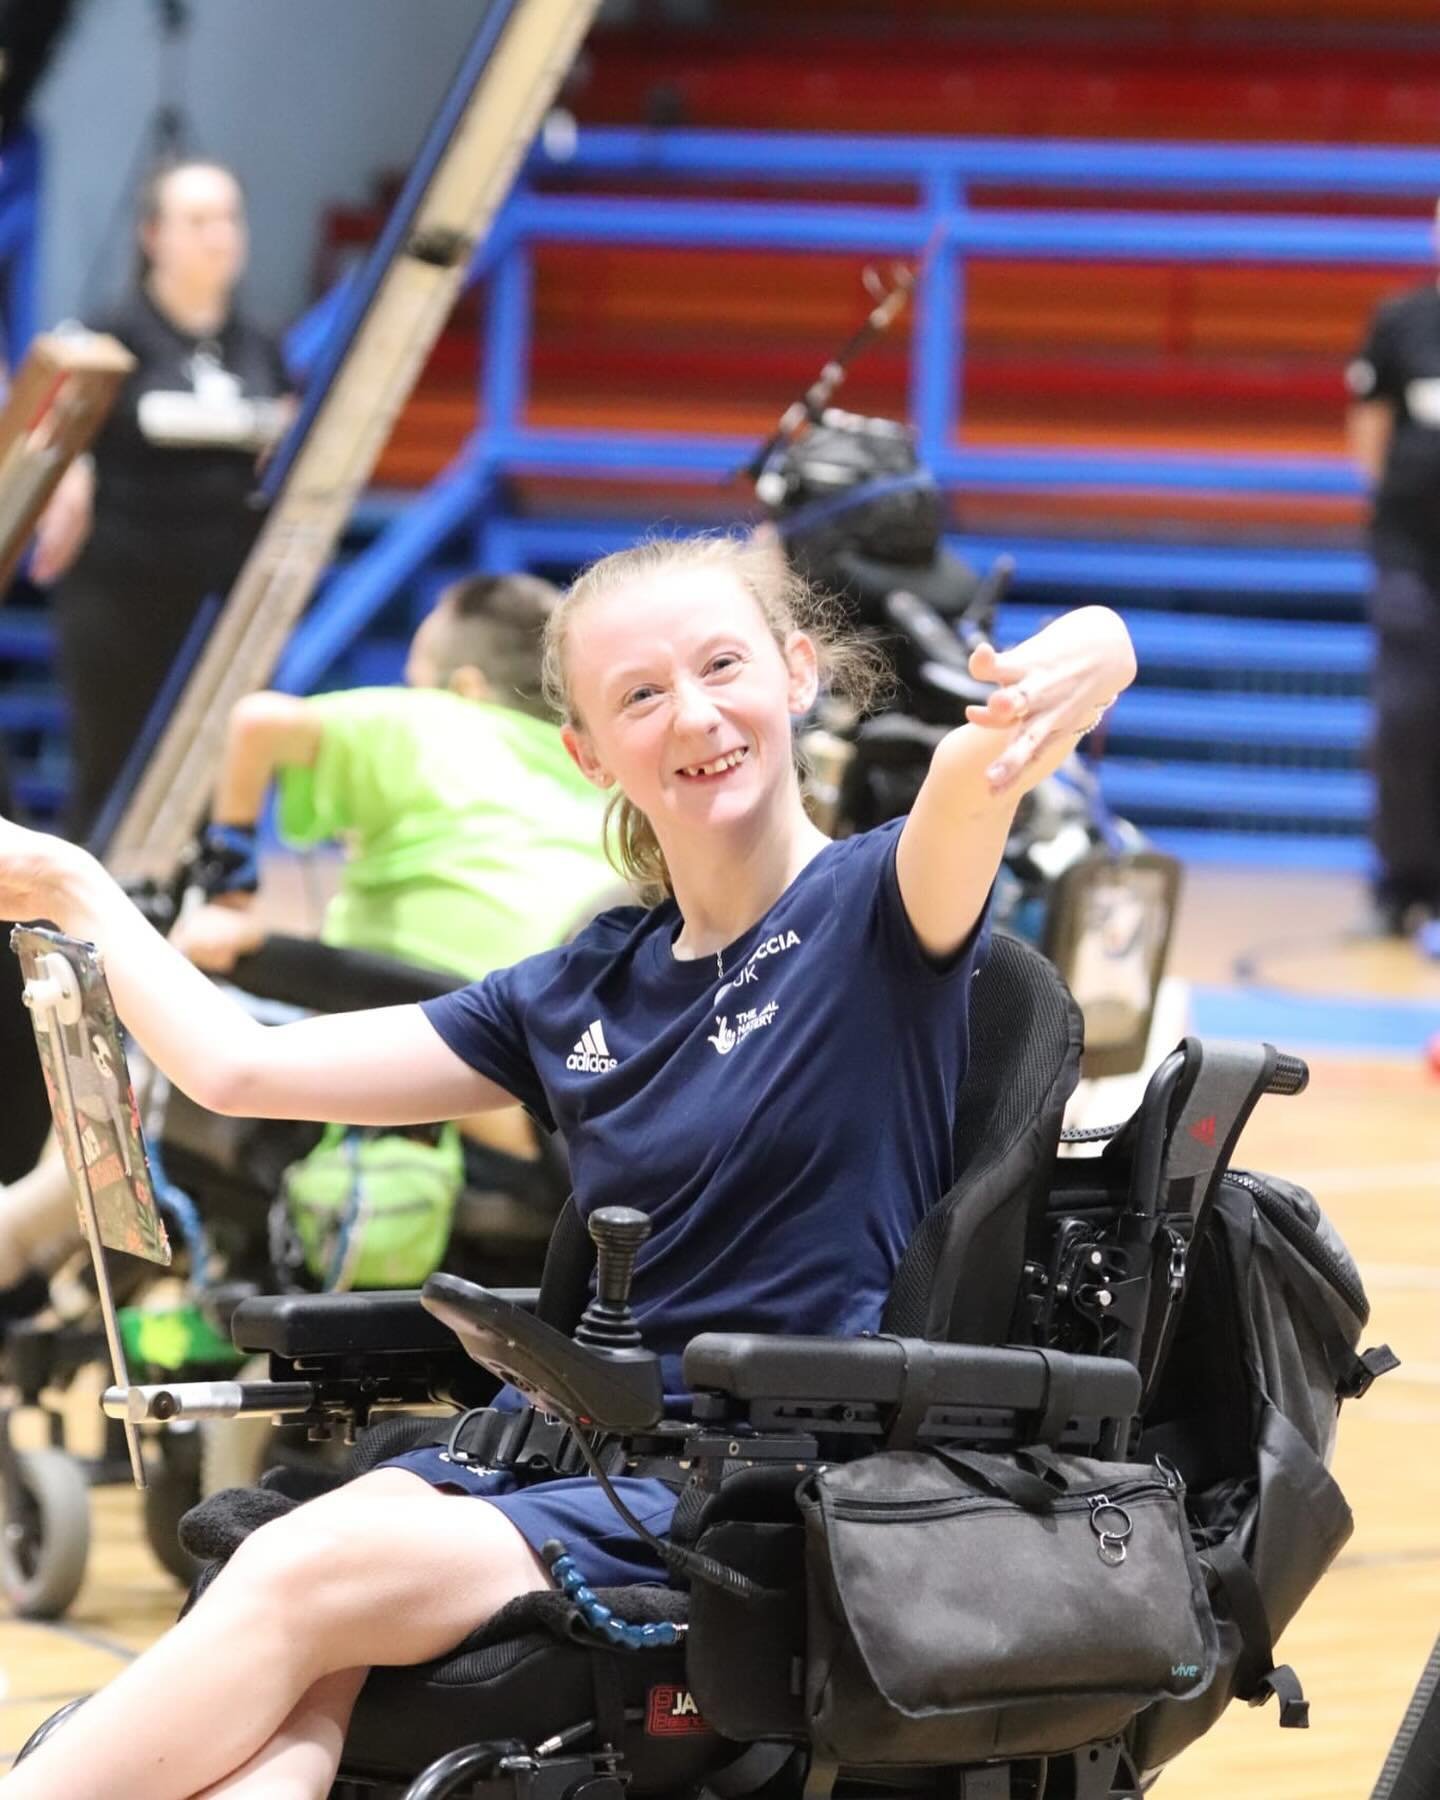 Happy Birthday @_robynn18 - we hope you have a brilliant day. Here&rsquo;s to another year of Percy Pigs, shopping and of course&hellip;. #boccia